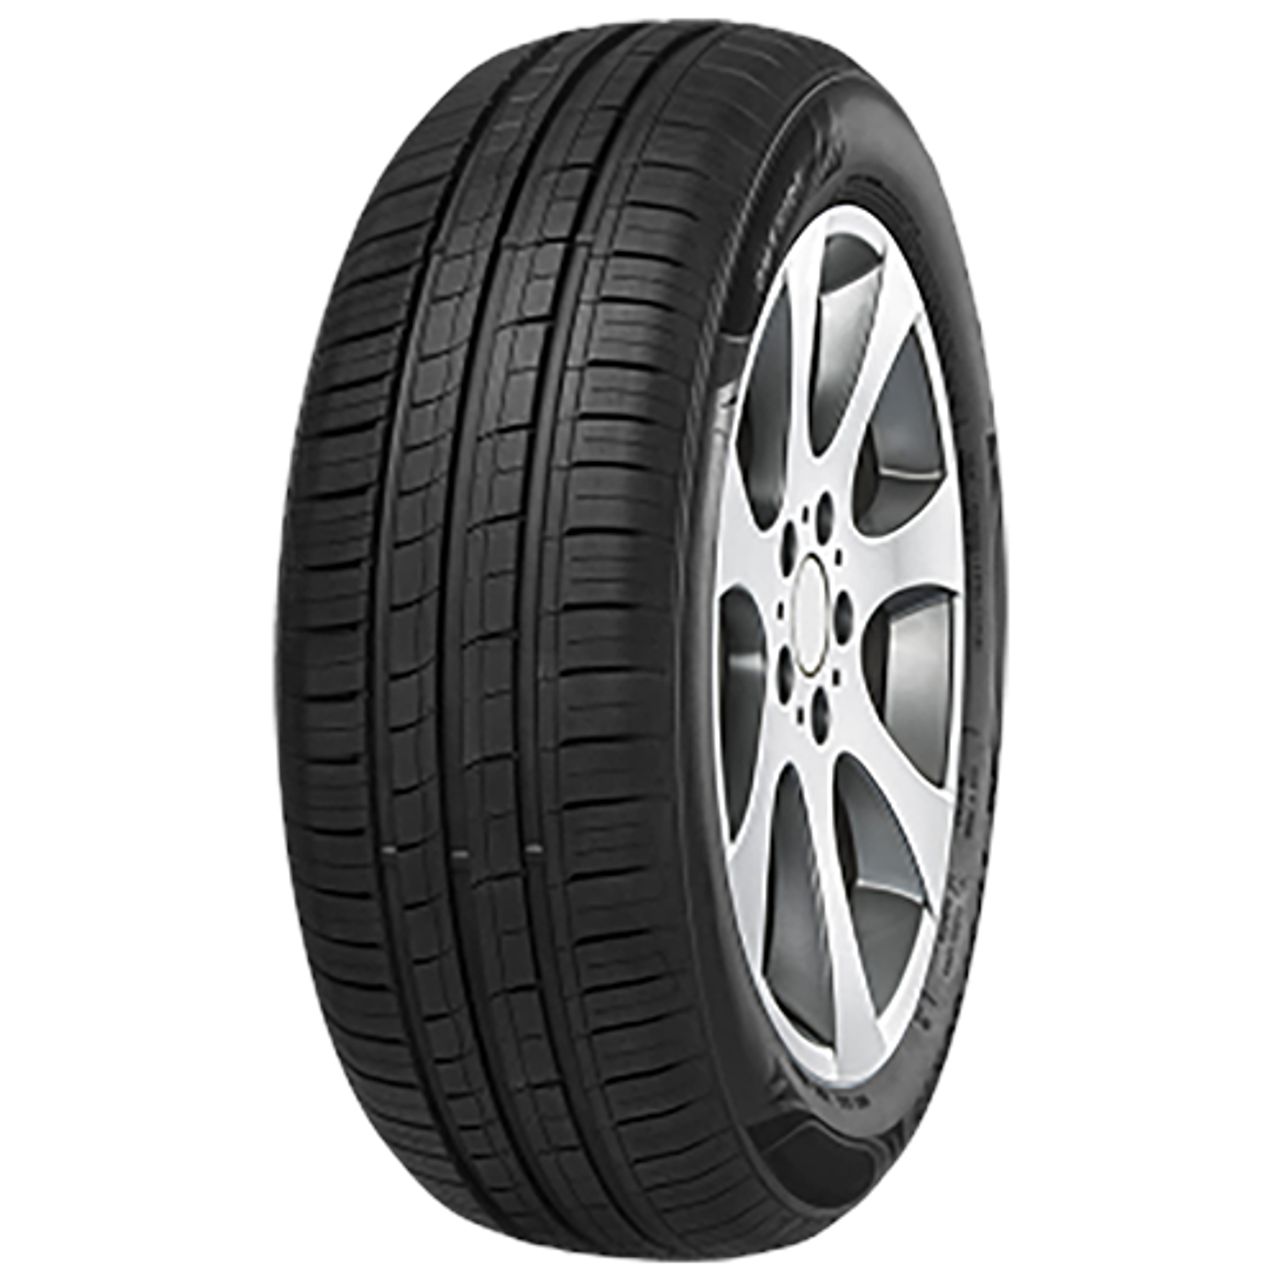 IMPERIAL ECODRIVER 4 175/80R14 88T BSW